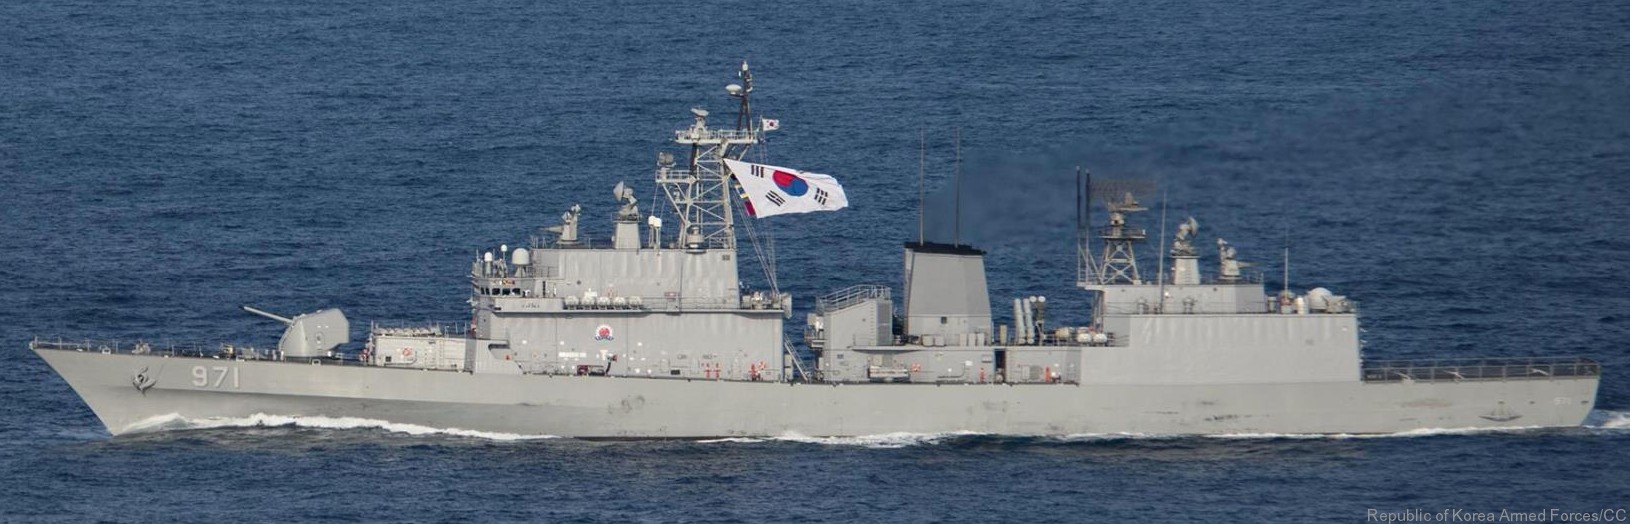 ddh-971 roks gwanggaeto the great destroyer republic of korea navy rokn sea sparrow missile helicopter 09